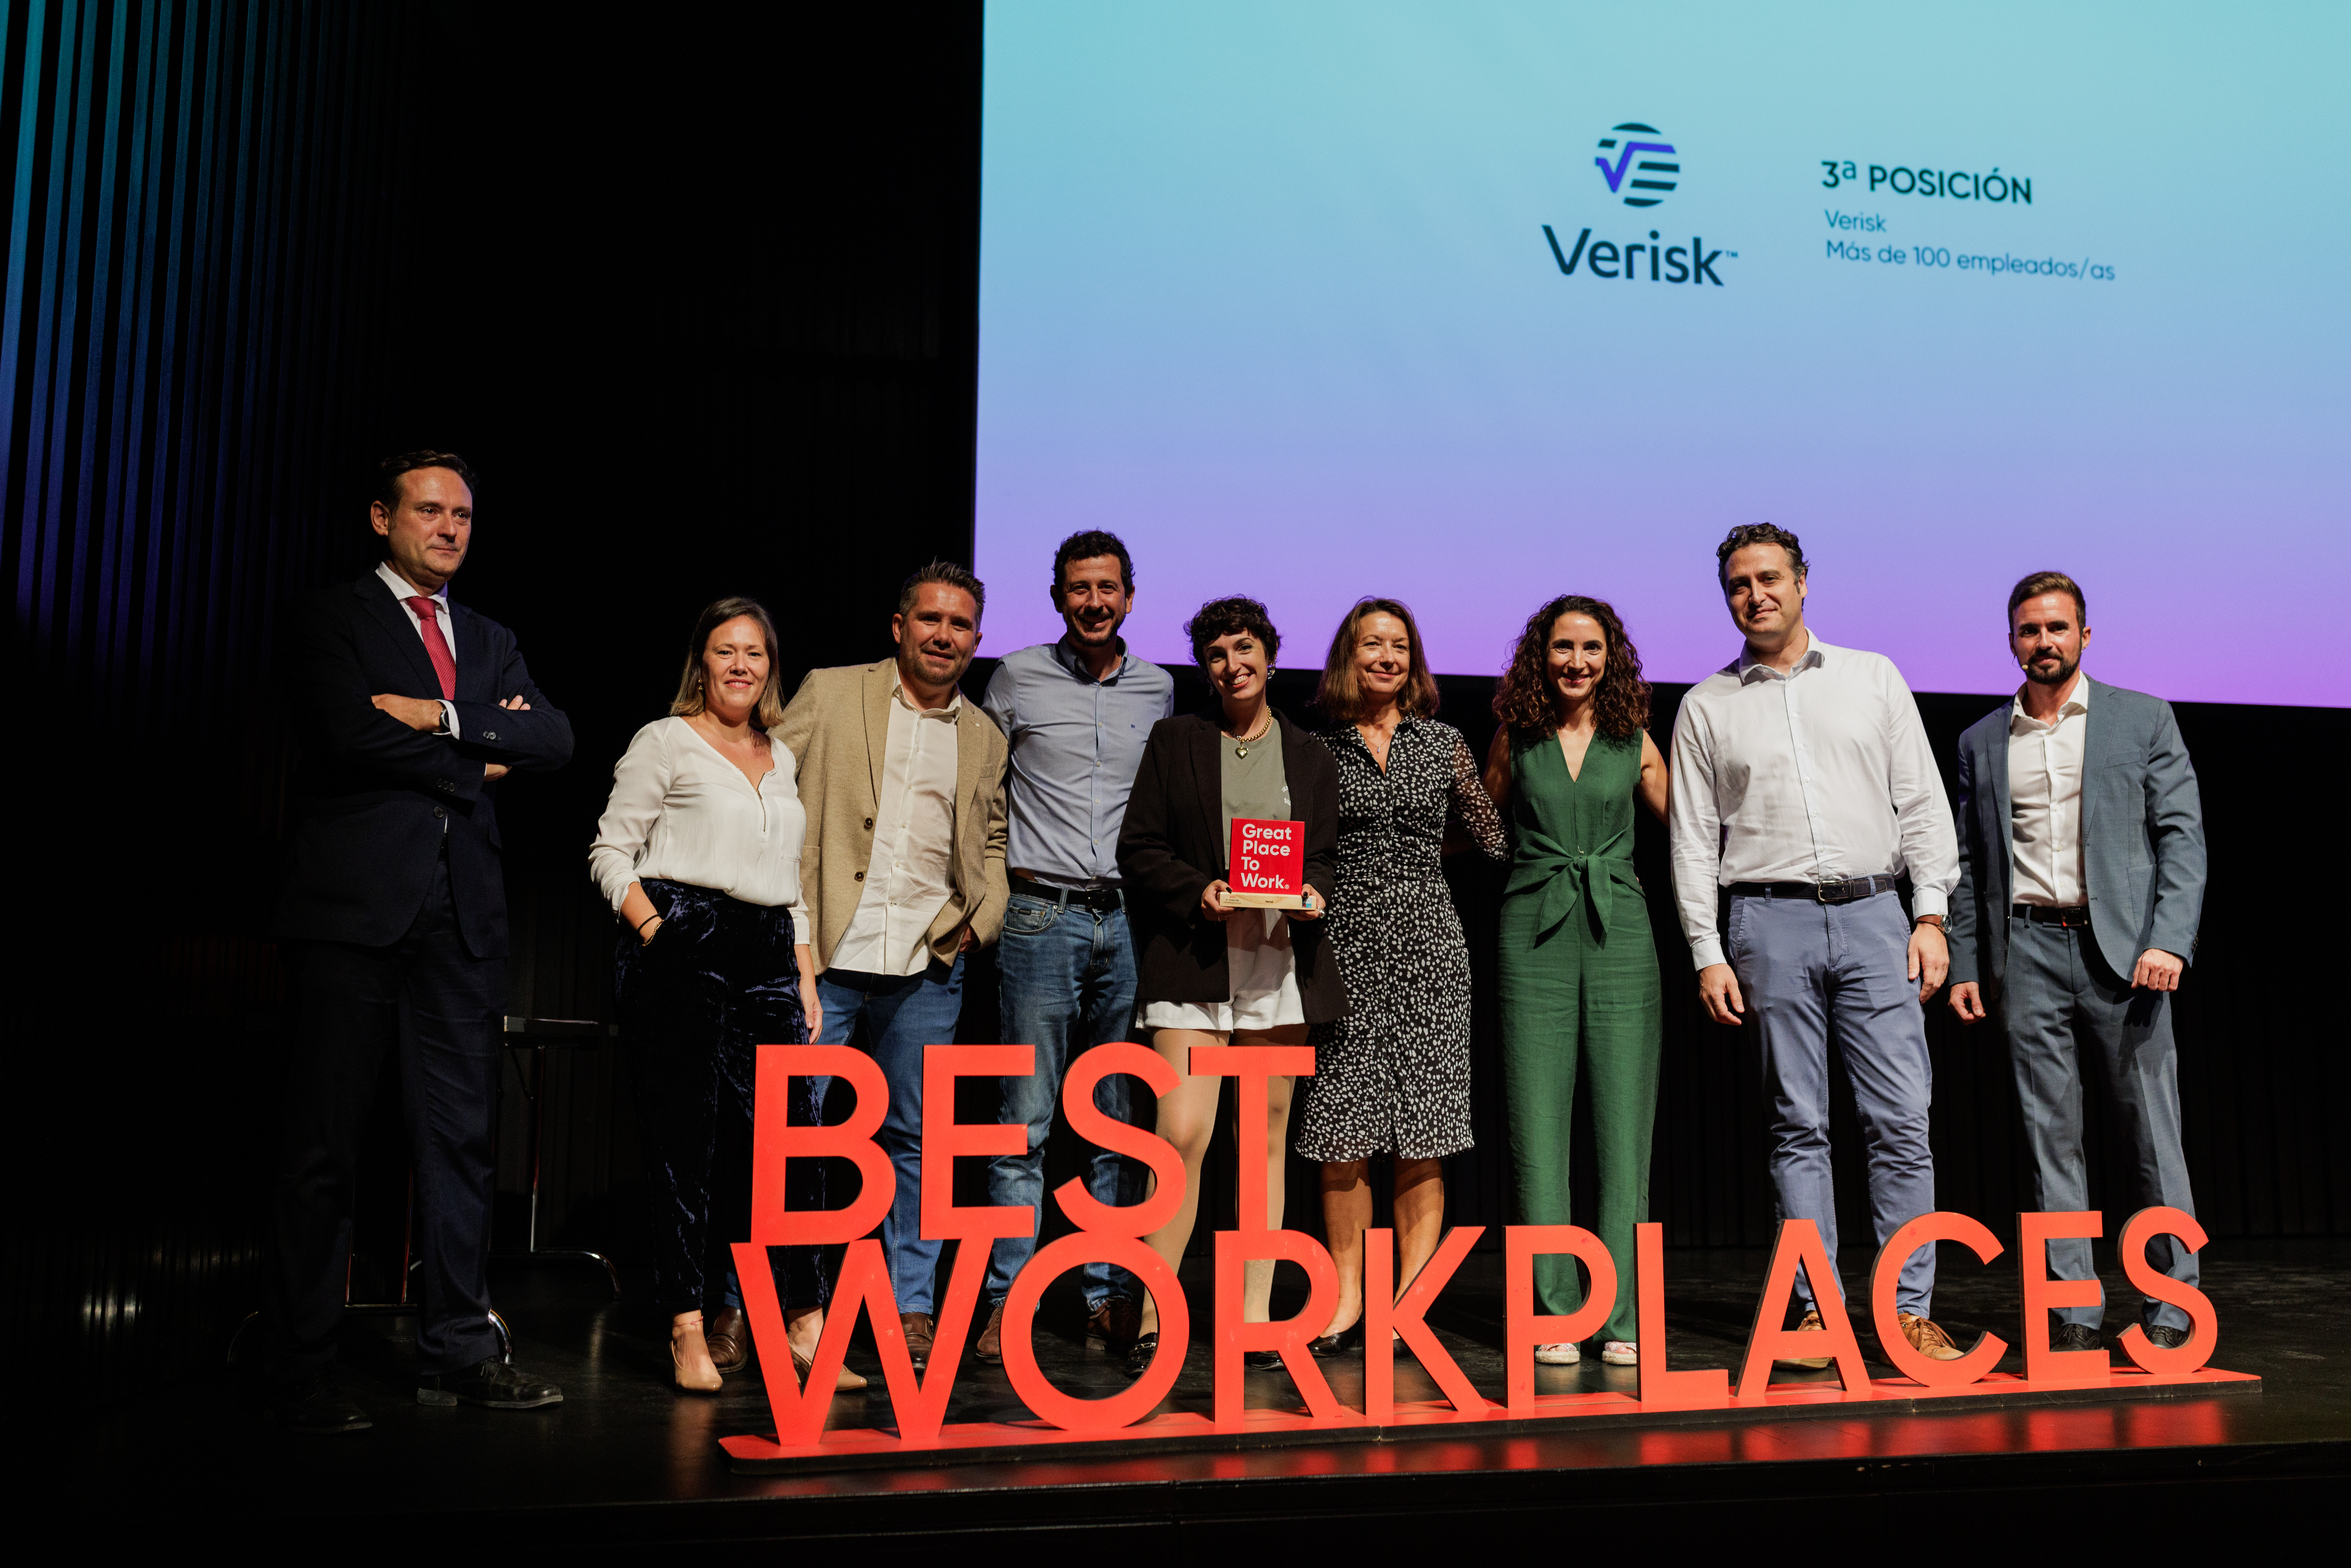 Verisk team at Best Workplaces in Málaga event